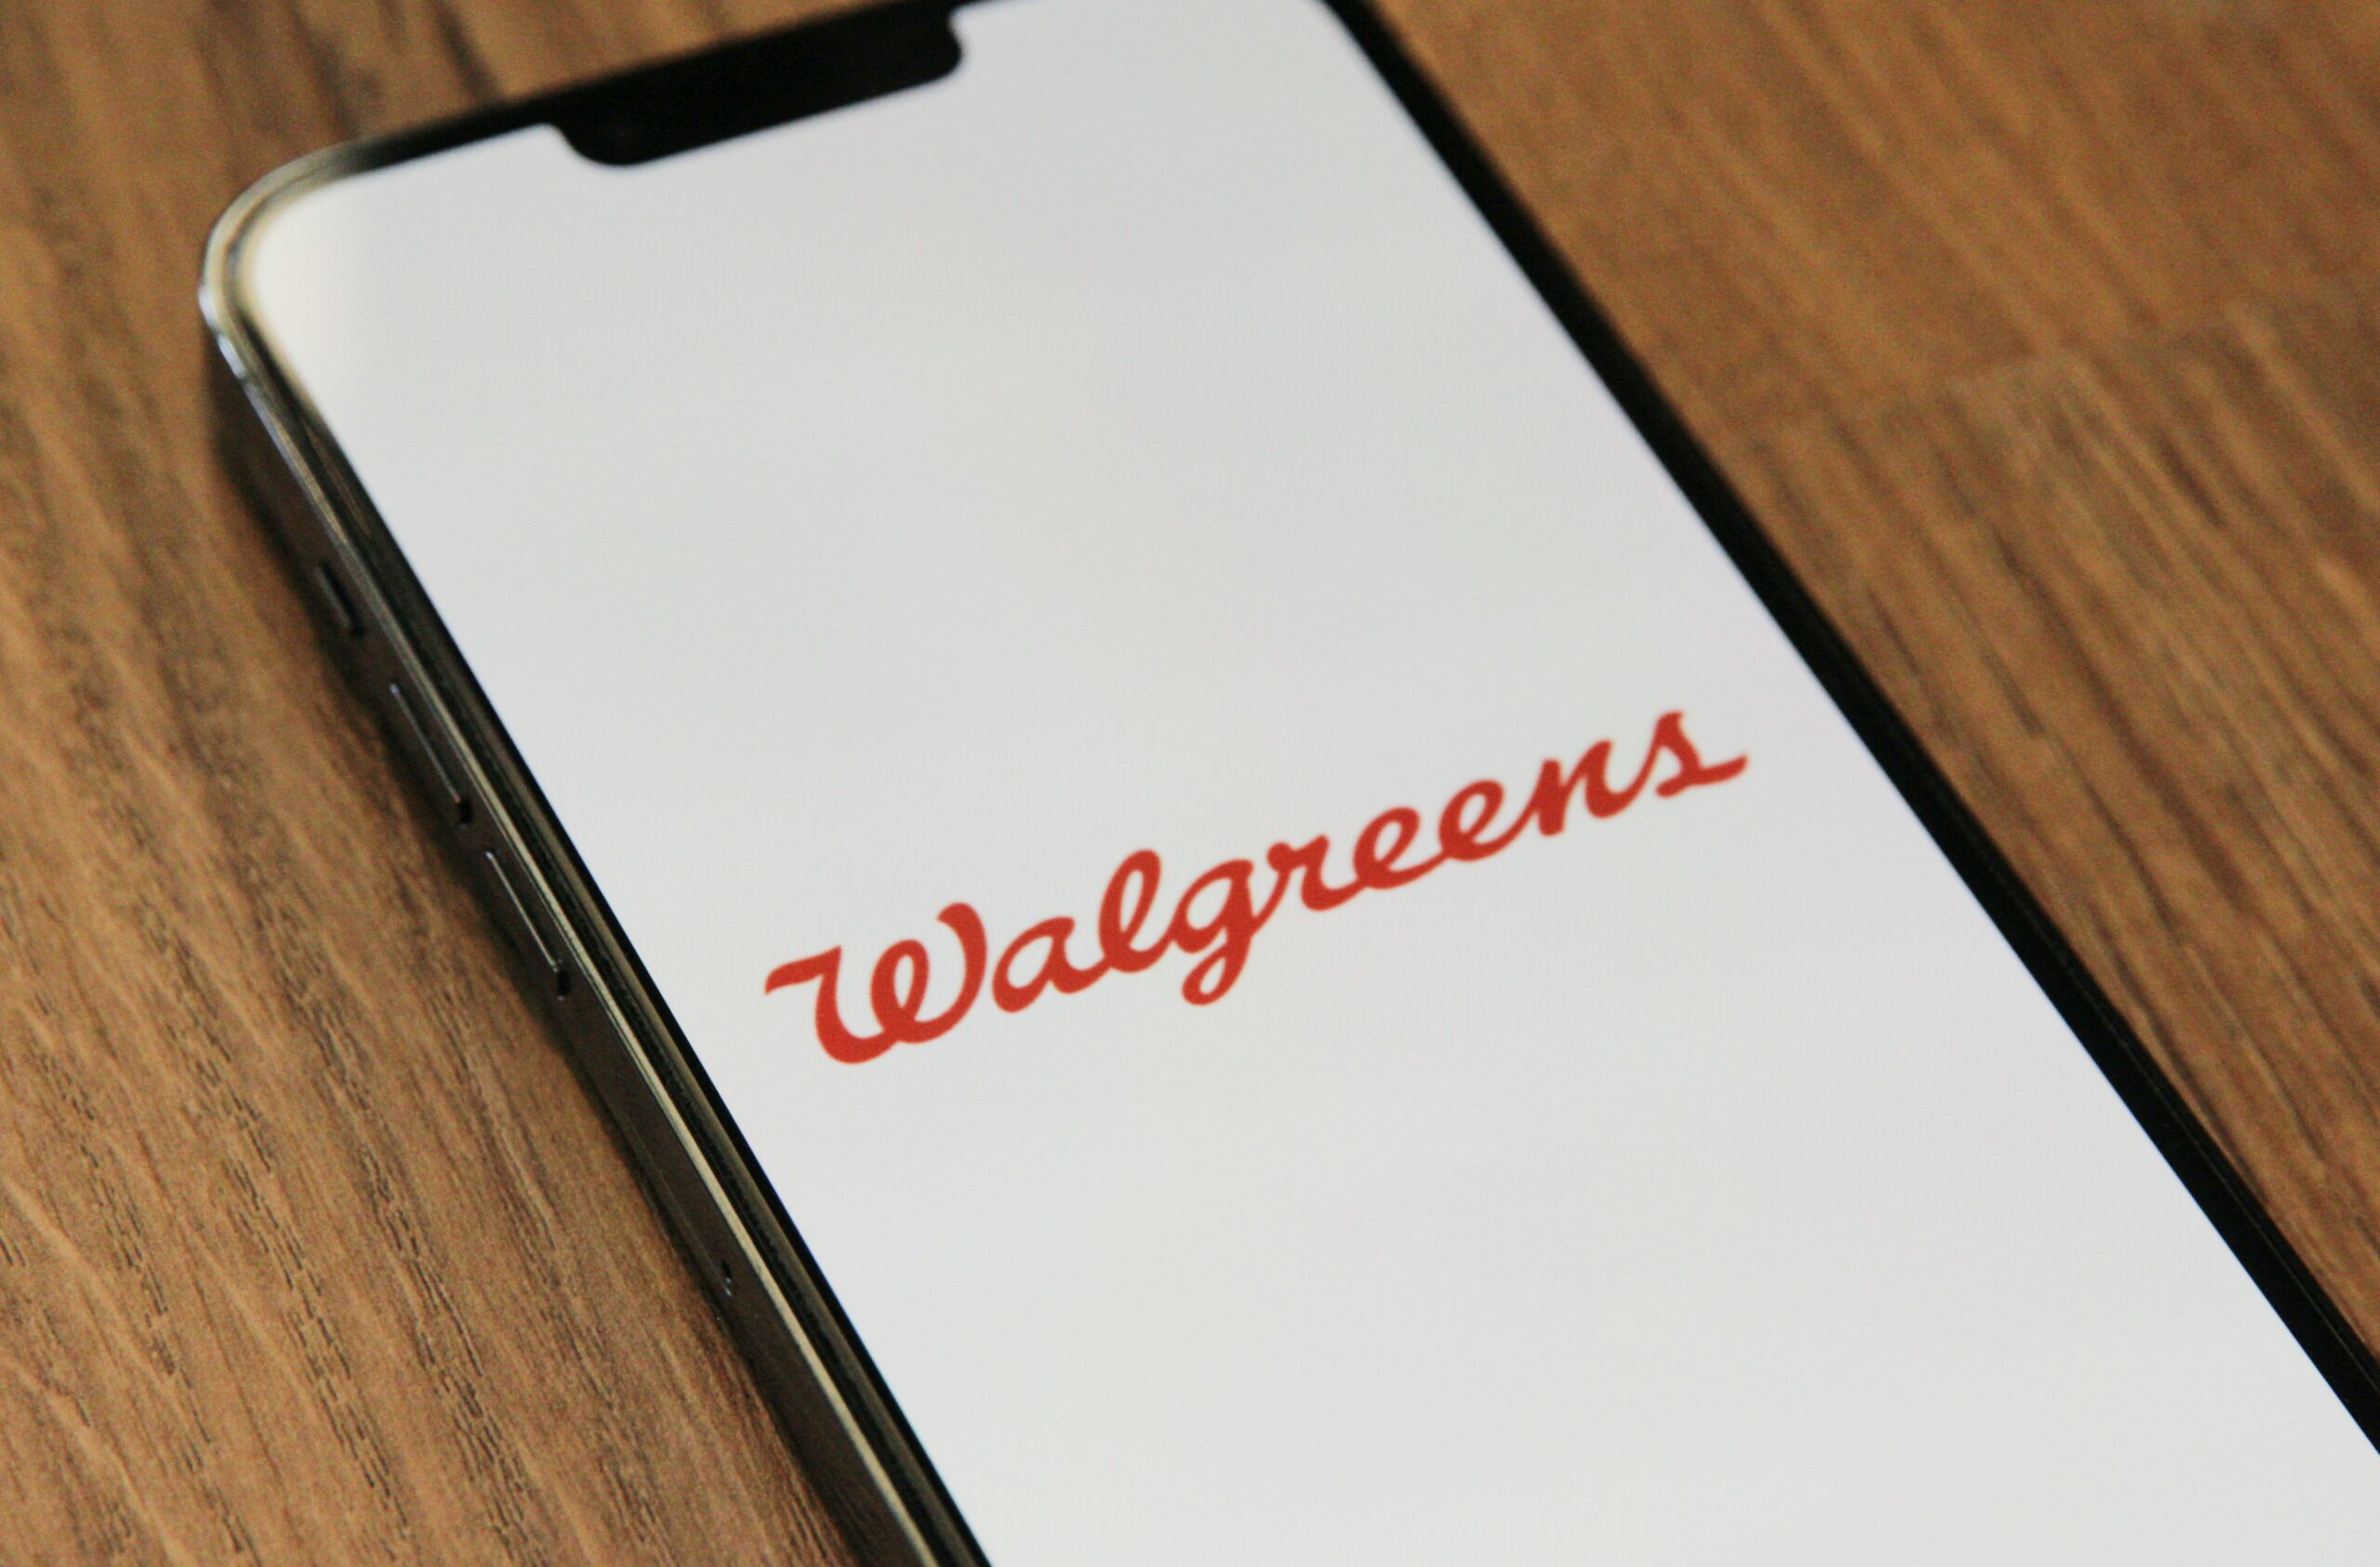 Walgreens red text on white on cell phone